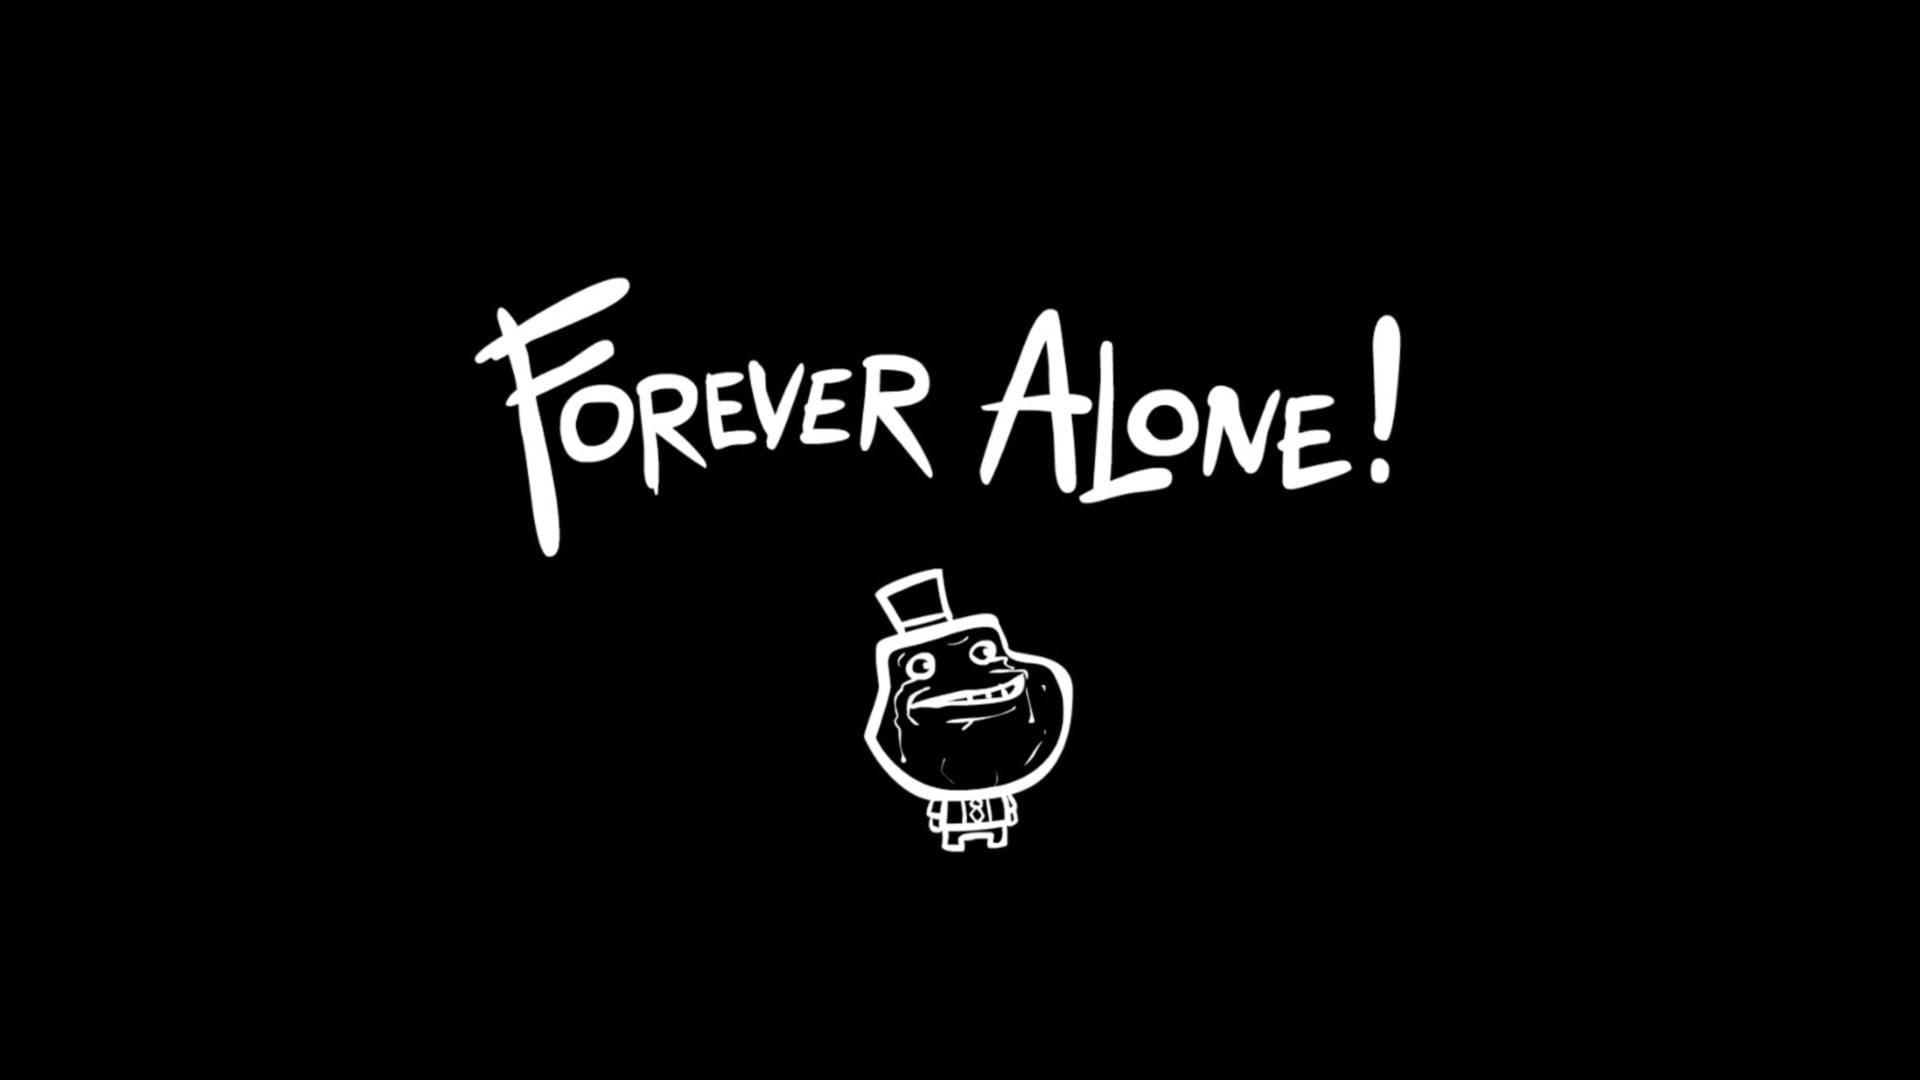 Forever Alone! wallpaper, memes, minimalism, simple background